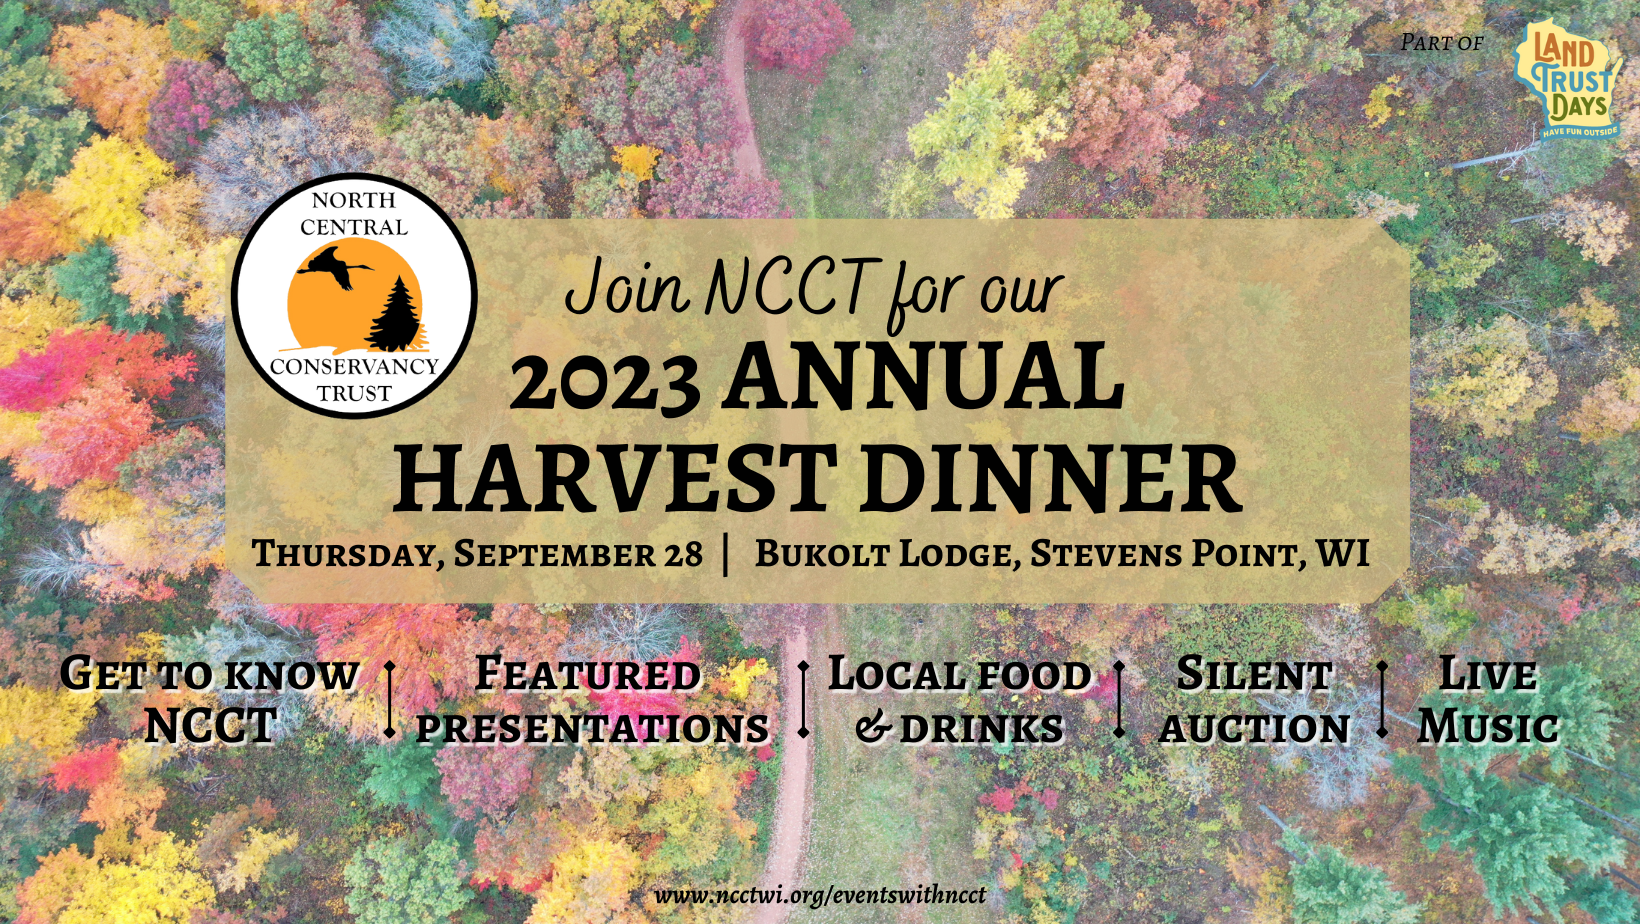 Picture with text that reads "Join NCCT for our 2023 Annual Harvest Dinner. Thursday, September 28. Bukolt Lodge, Stevens Point, WI. Get to know NCCT. Featured presentations. Local food and drinks. Silent auction. Live music"